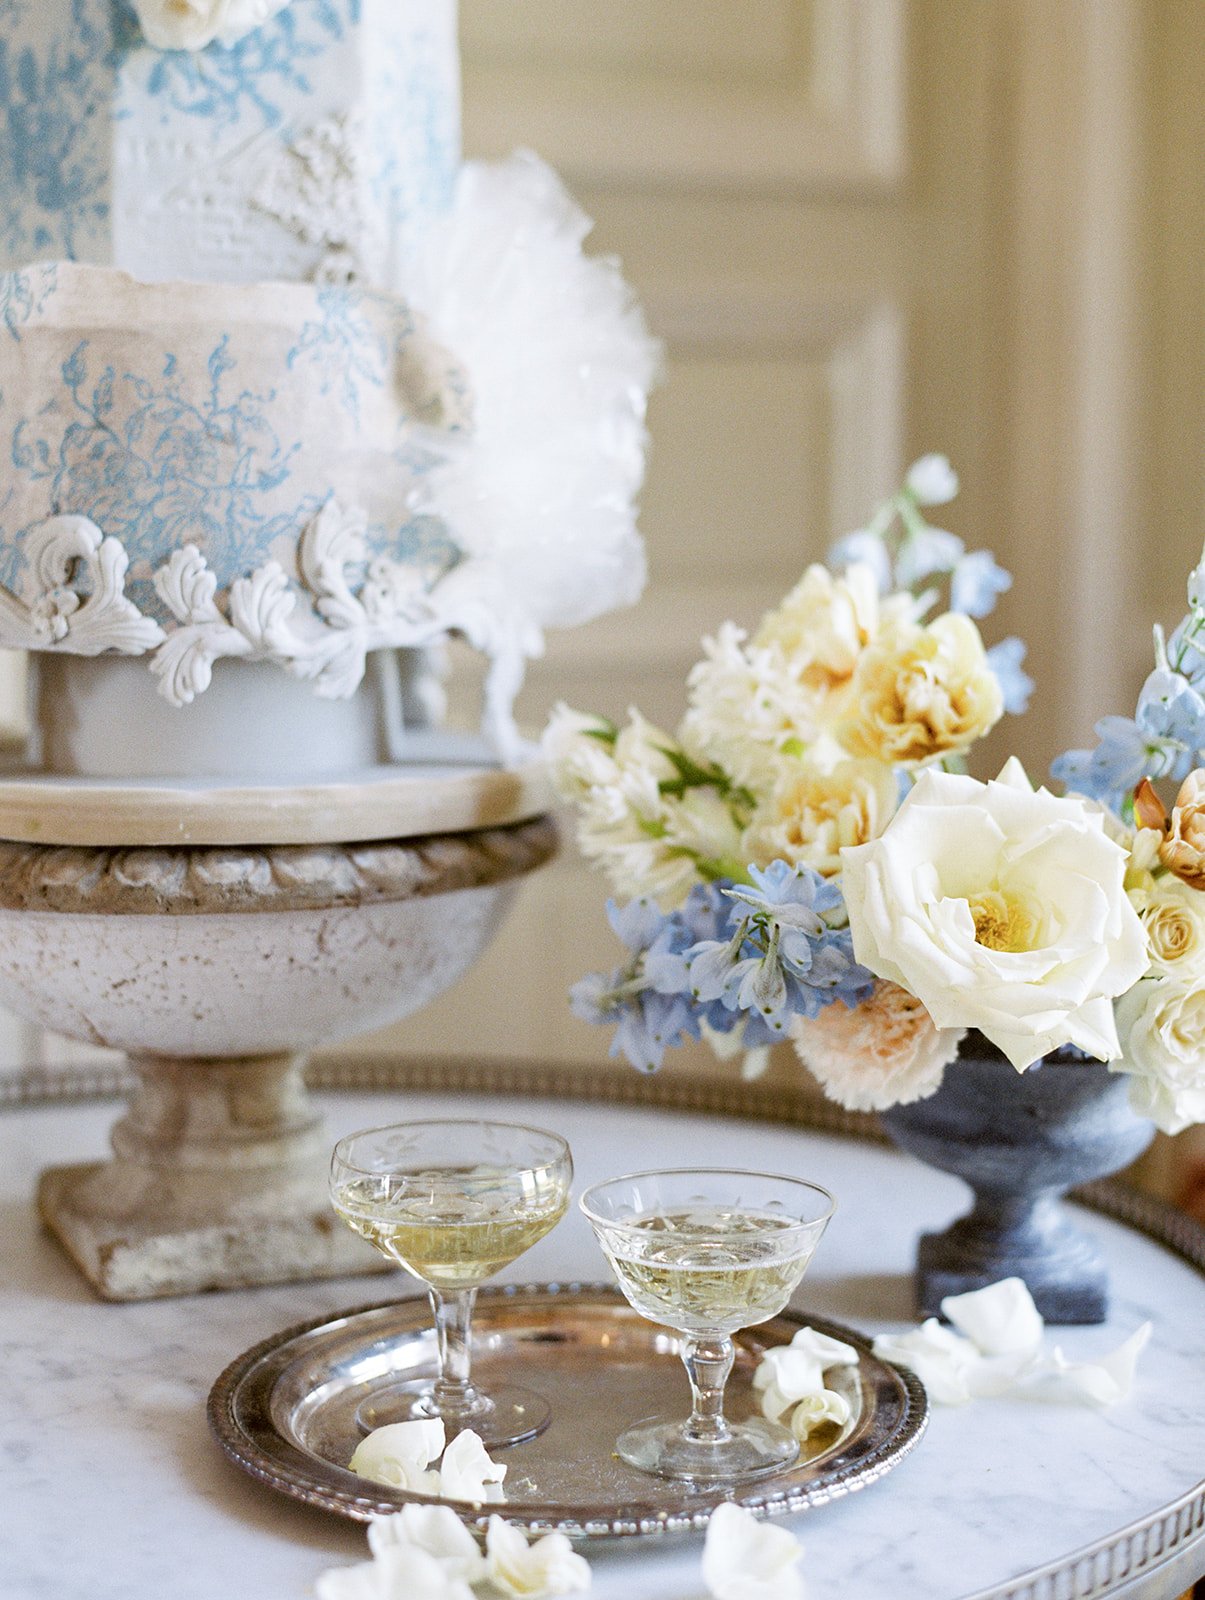 A blue and white  wedding cake on a table at a French chateau wedding.